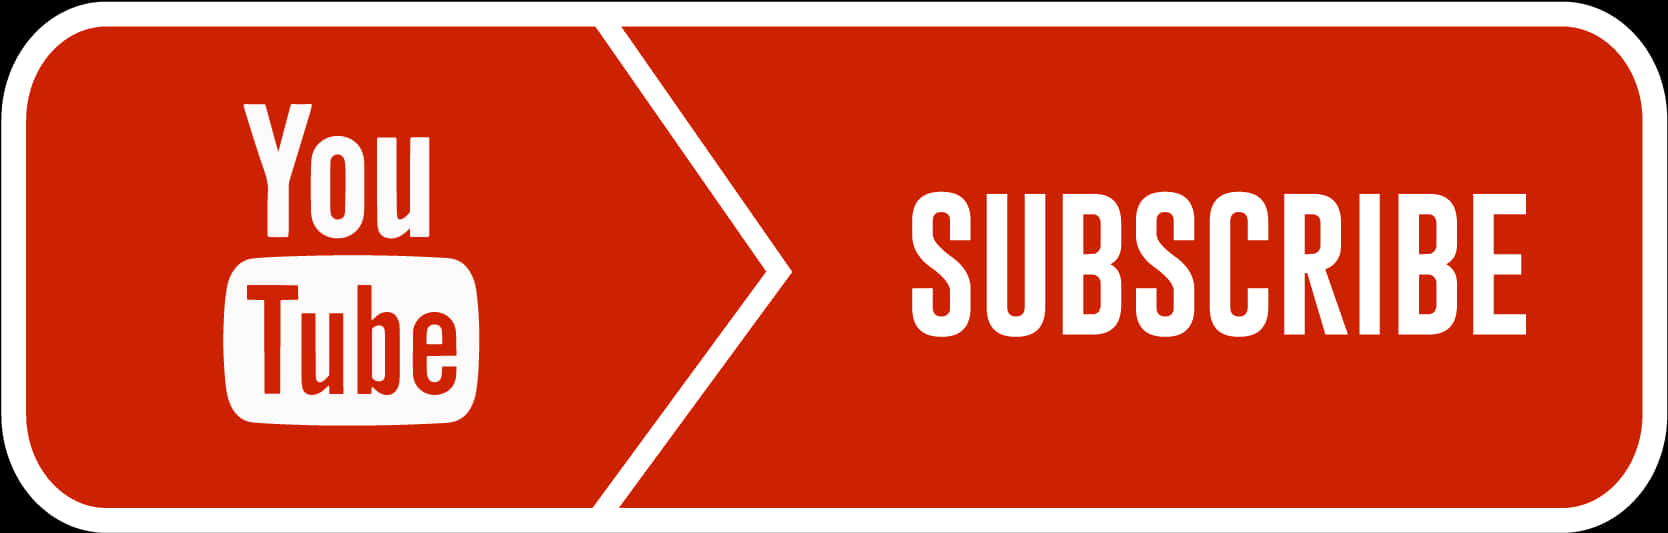 You Tube Subscribe Button Graphic PNG image